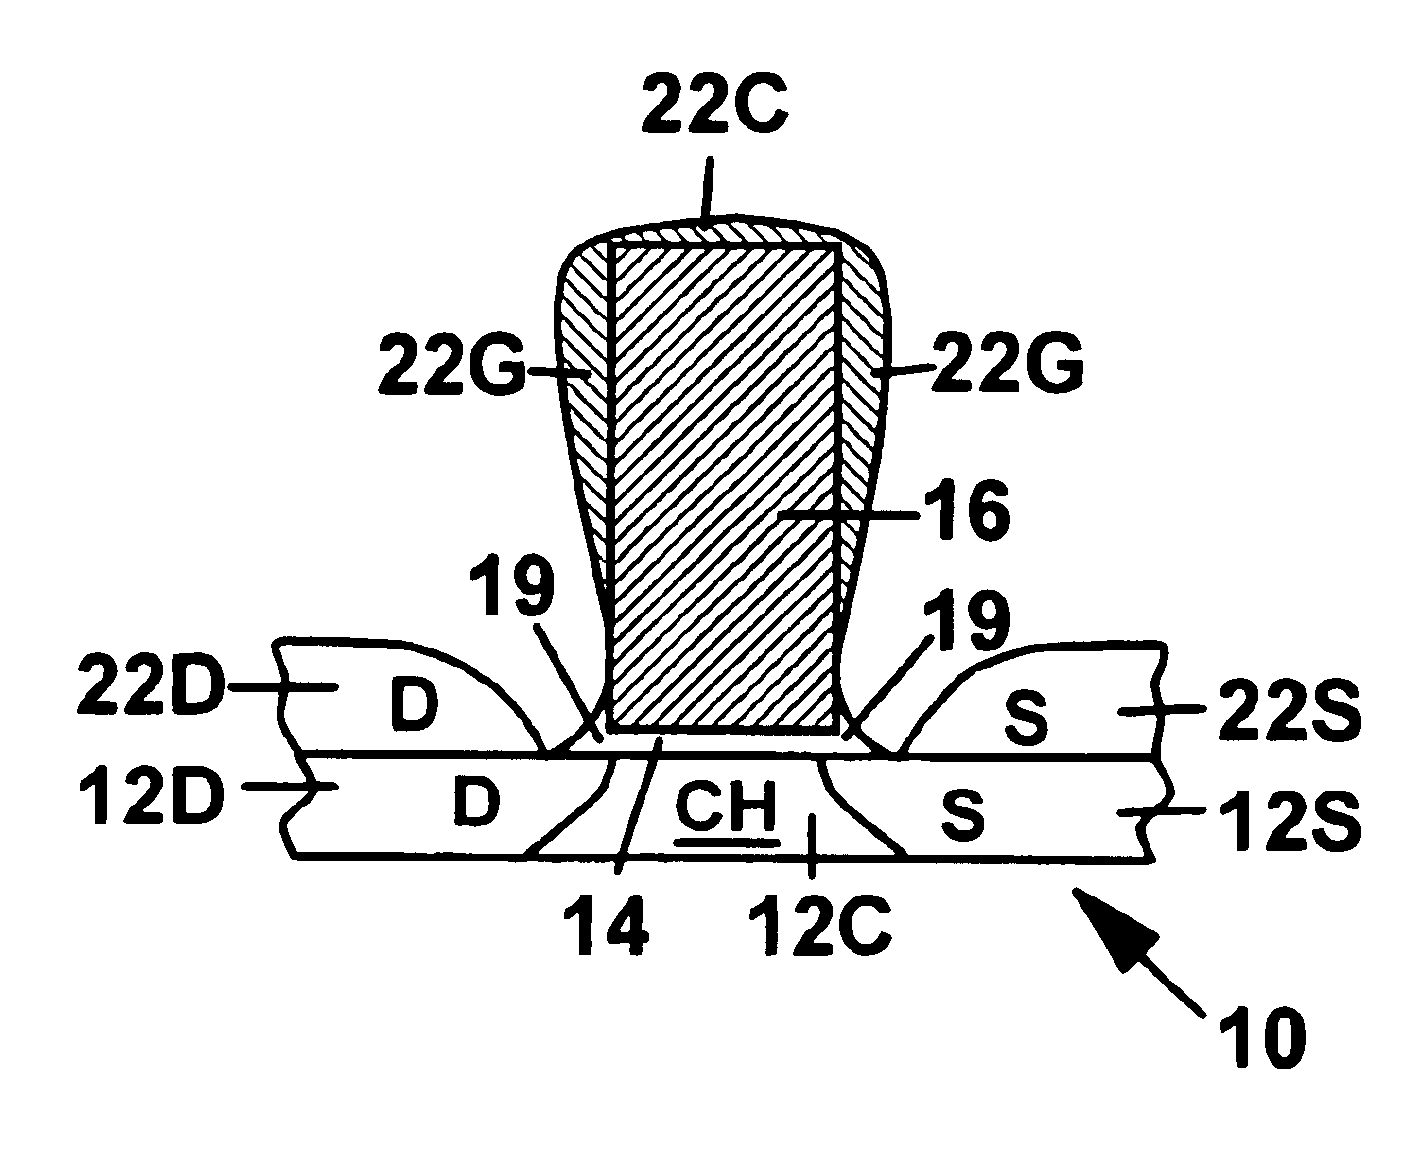 MOSFET device with in-situ doped, raised source and drain structures